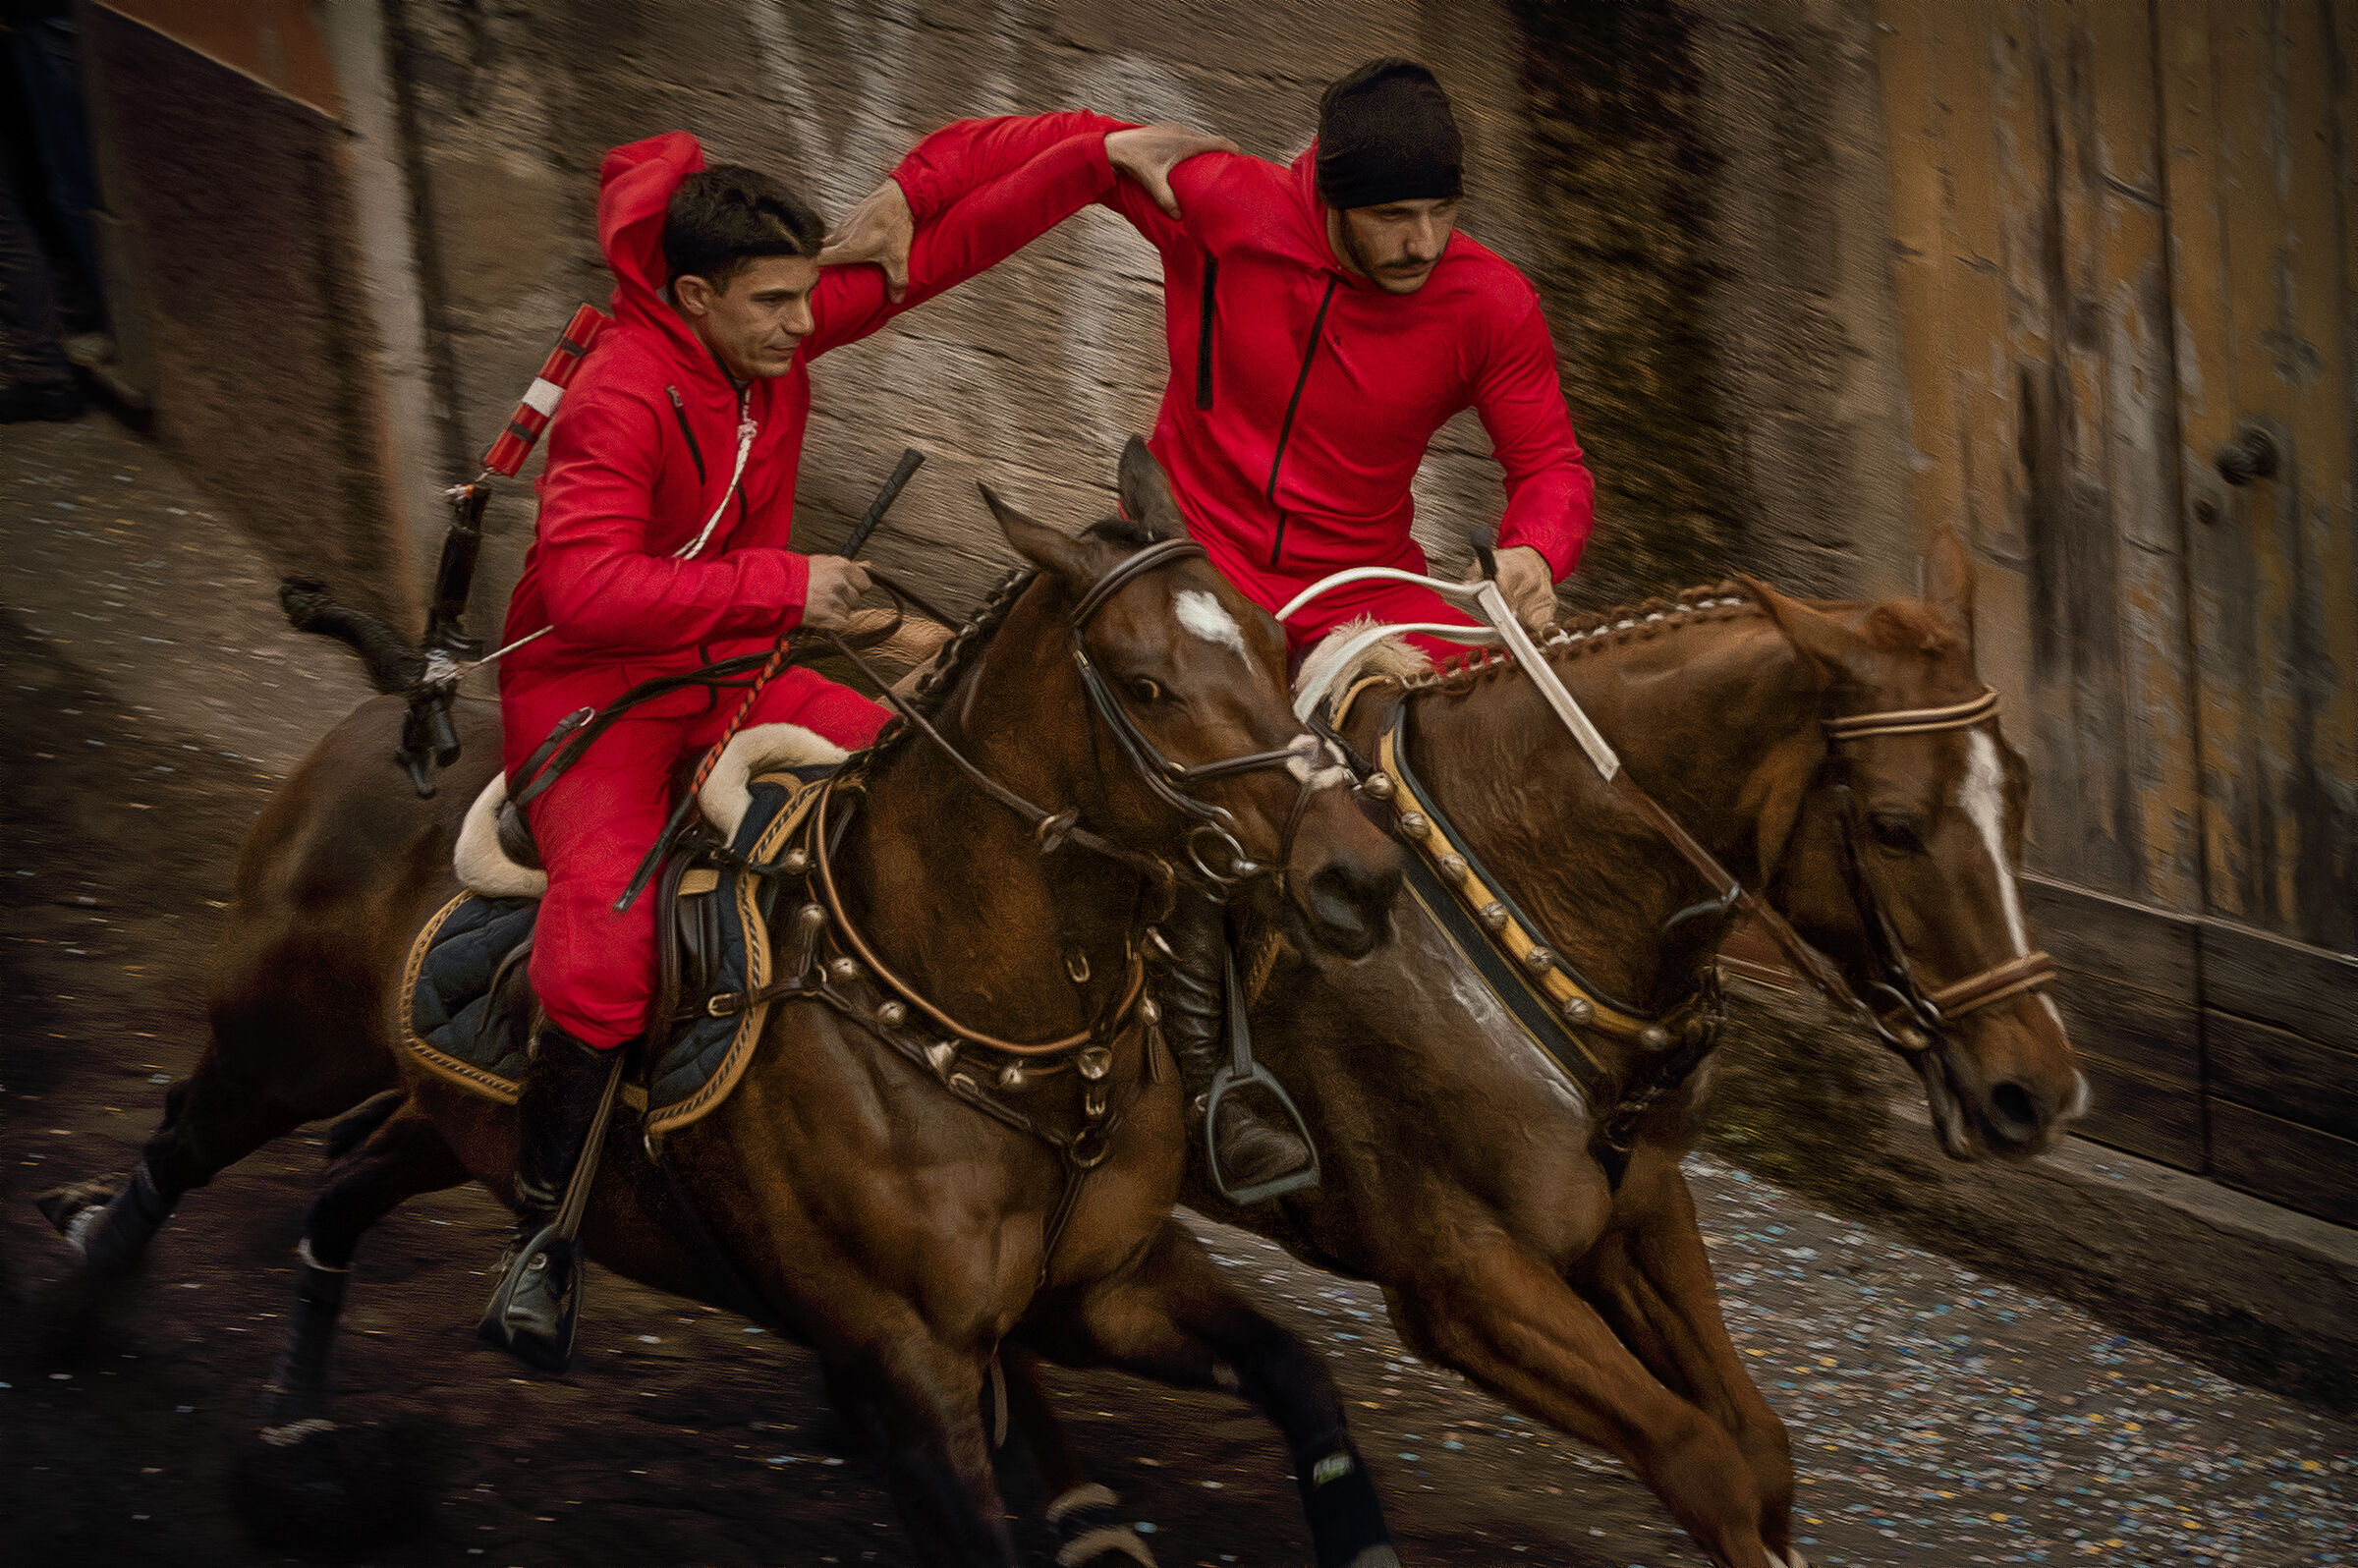 The Red Knights-Dedicated to Antonio Dell'Aquila...